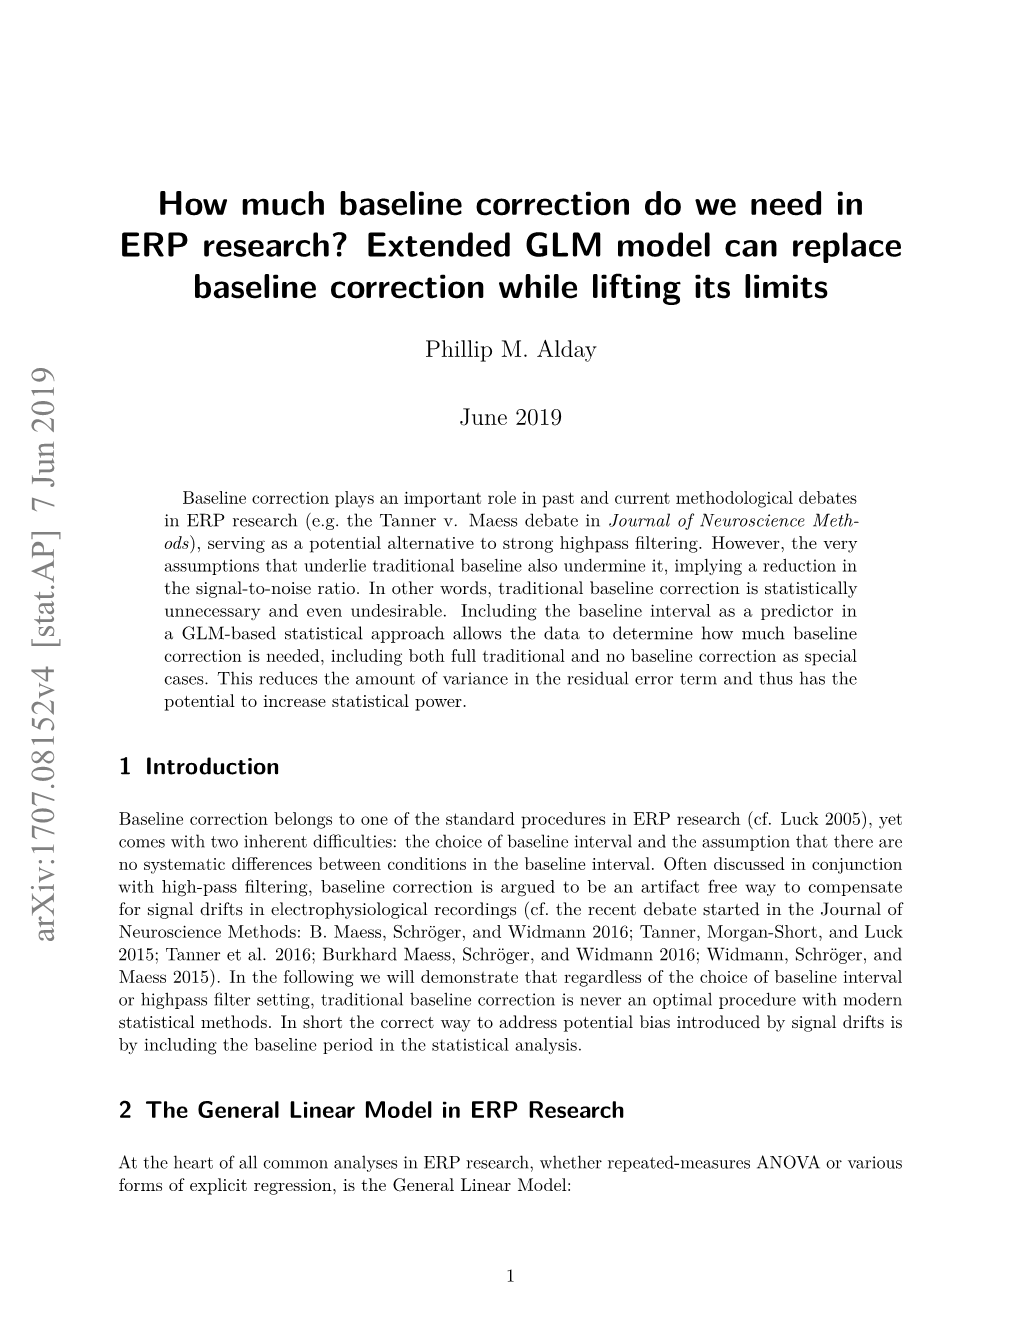 How Much Baseline Correction Do We Need in ERP Research? Extended GLM Model Can Replace Baseline Correction While Lifting Its Limits